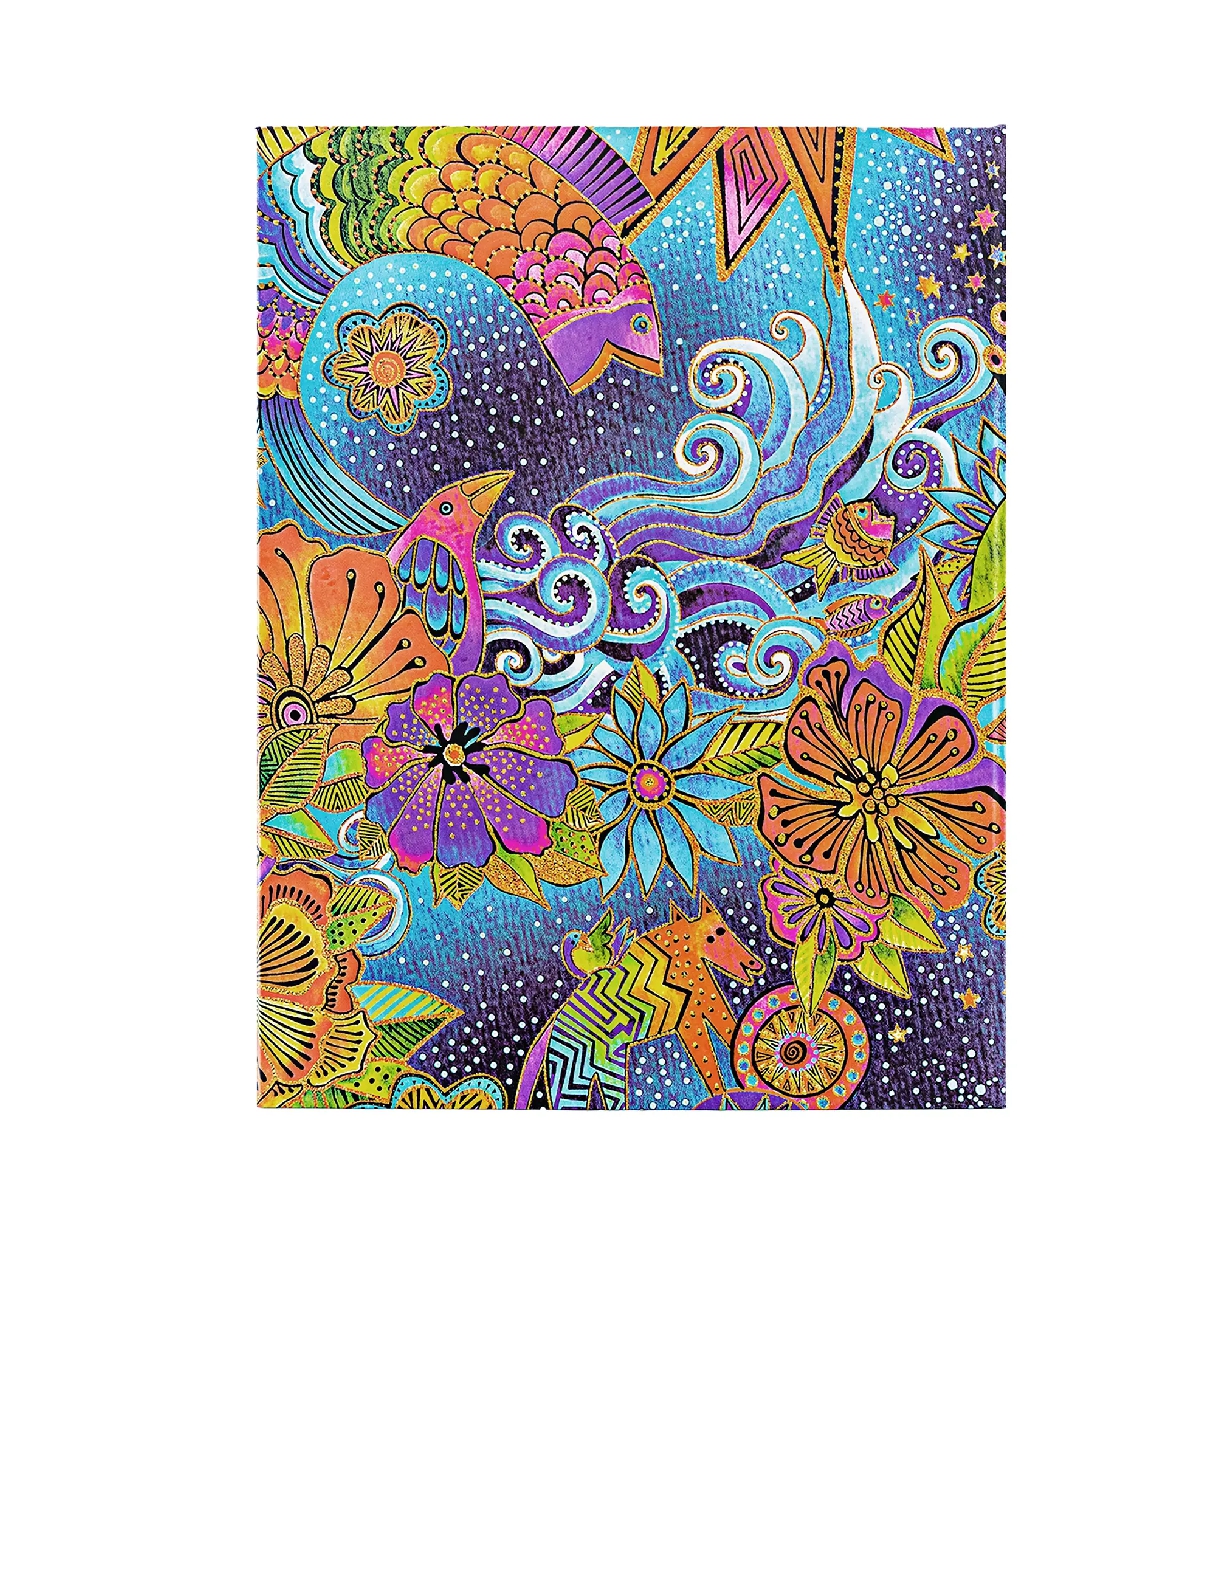 Celestial Magic, Whimsical Creations, Hardcover Journals, Ultra, Unlined, Wrap, 144 Pg, 120 GSM